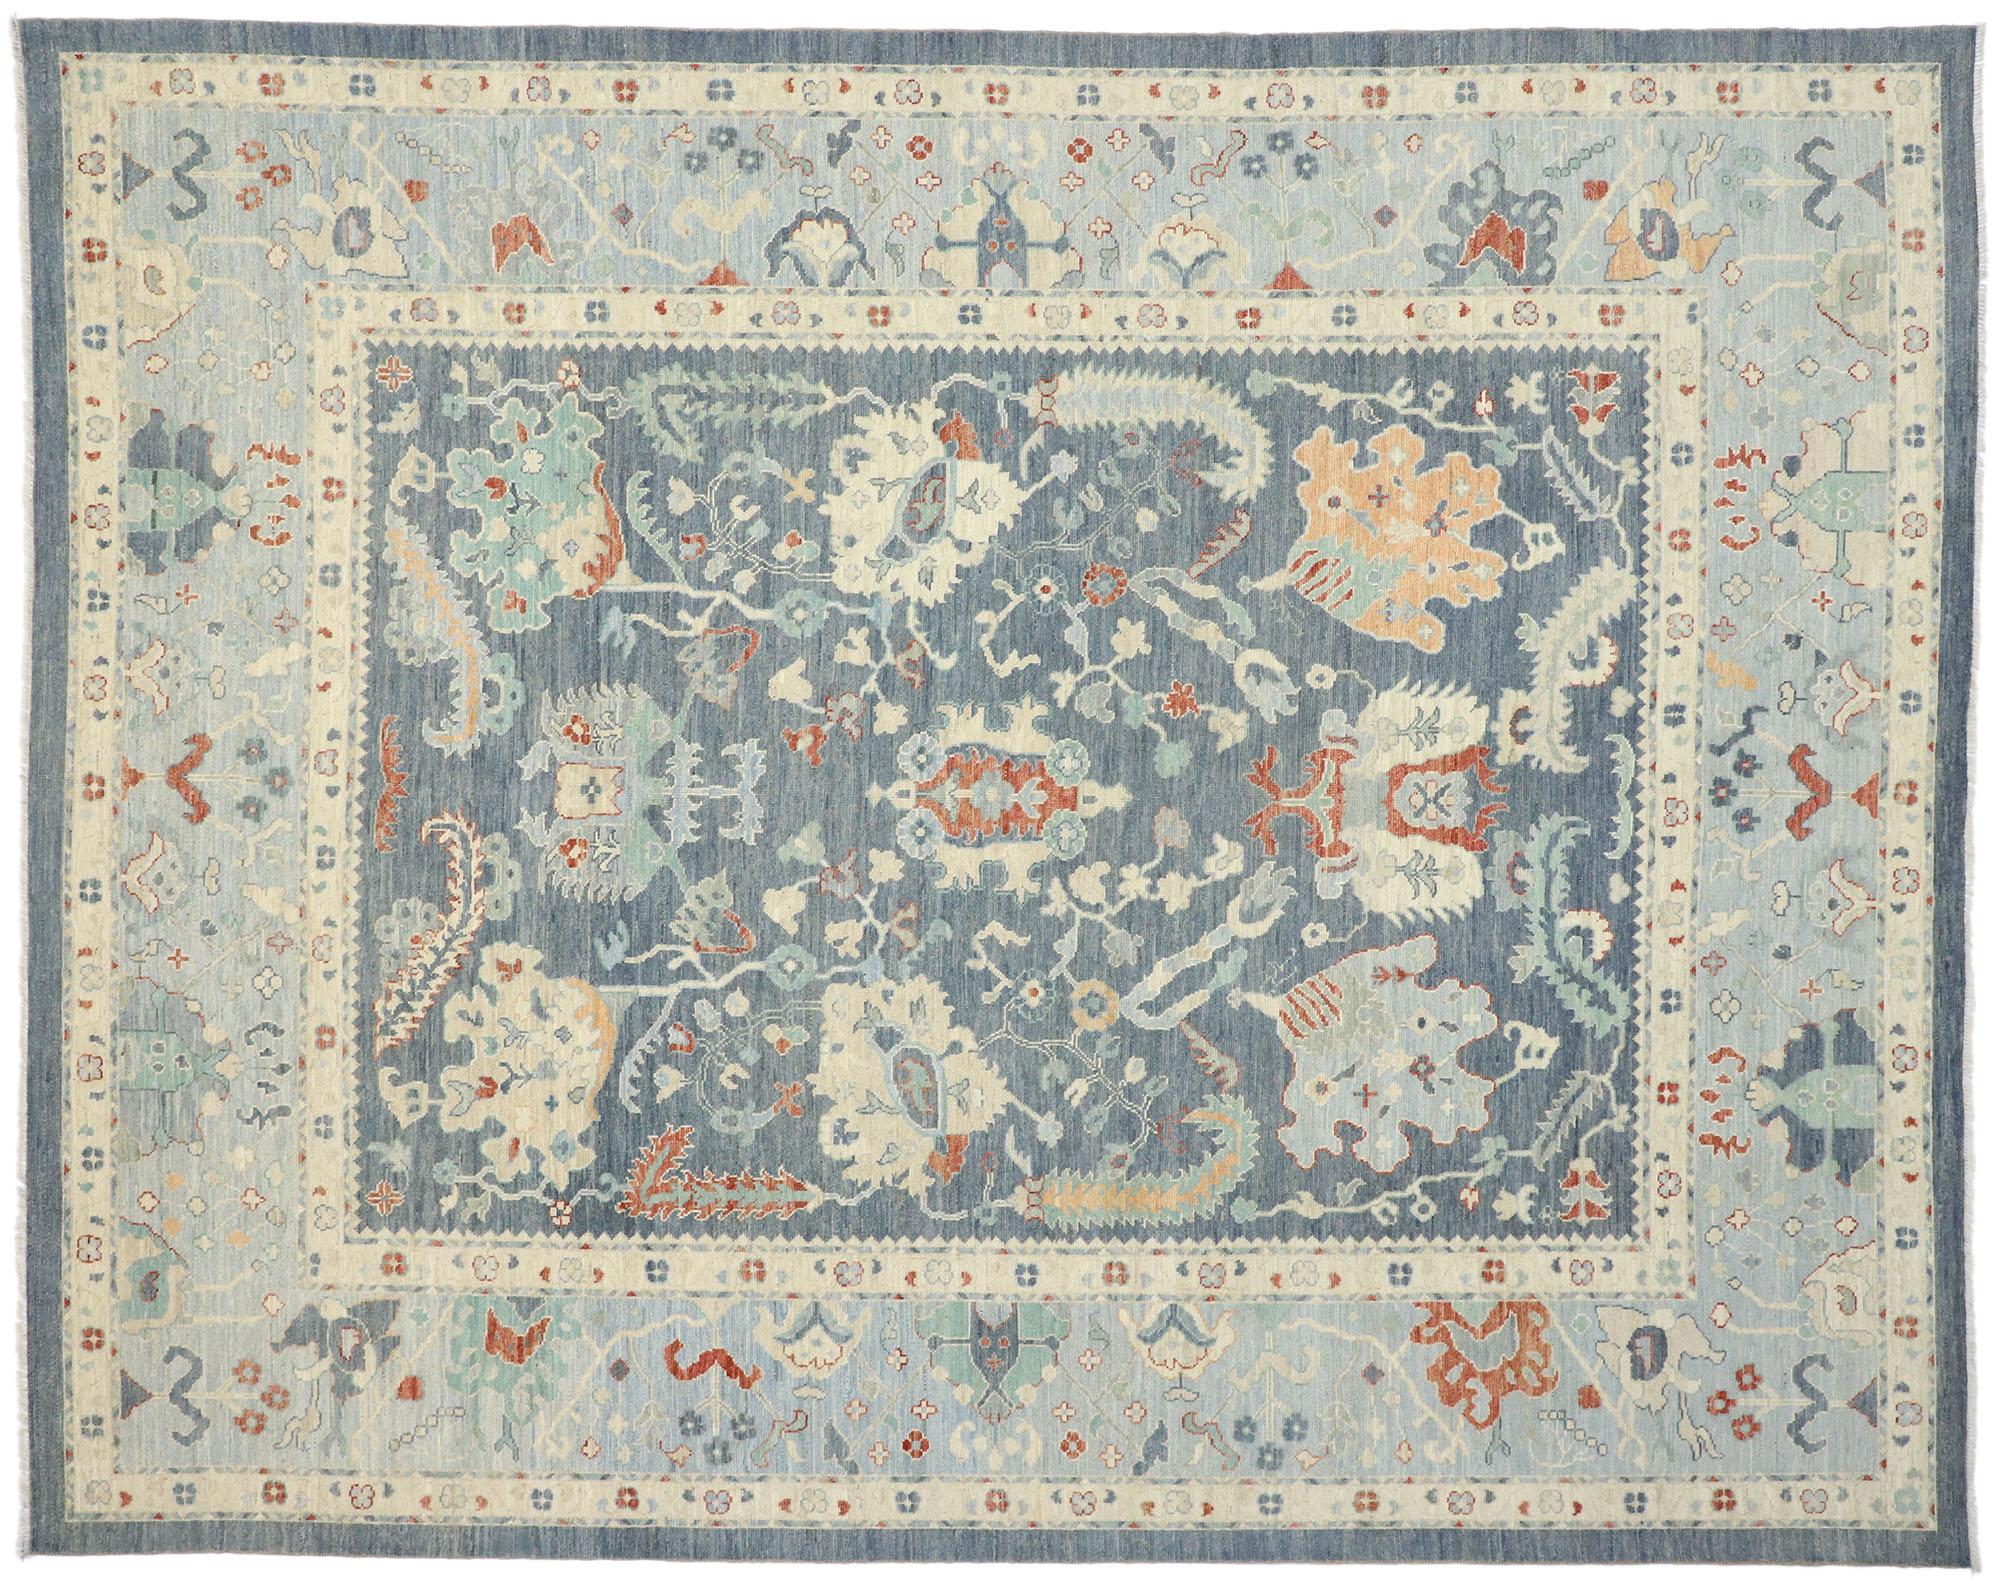 80558 New Colorful Blue Oushak Rug, 11'07 x 14'08. With timeless appeal and a classic color palette, this hand-knotted wool contemporary Oushak style area rug will boost the coziness factor in nearly any space. The large-scale geometric print and